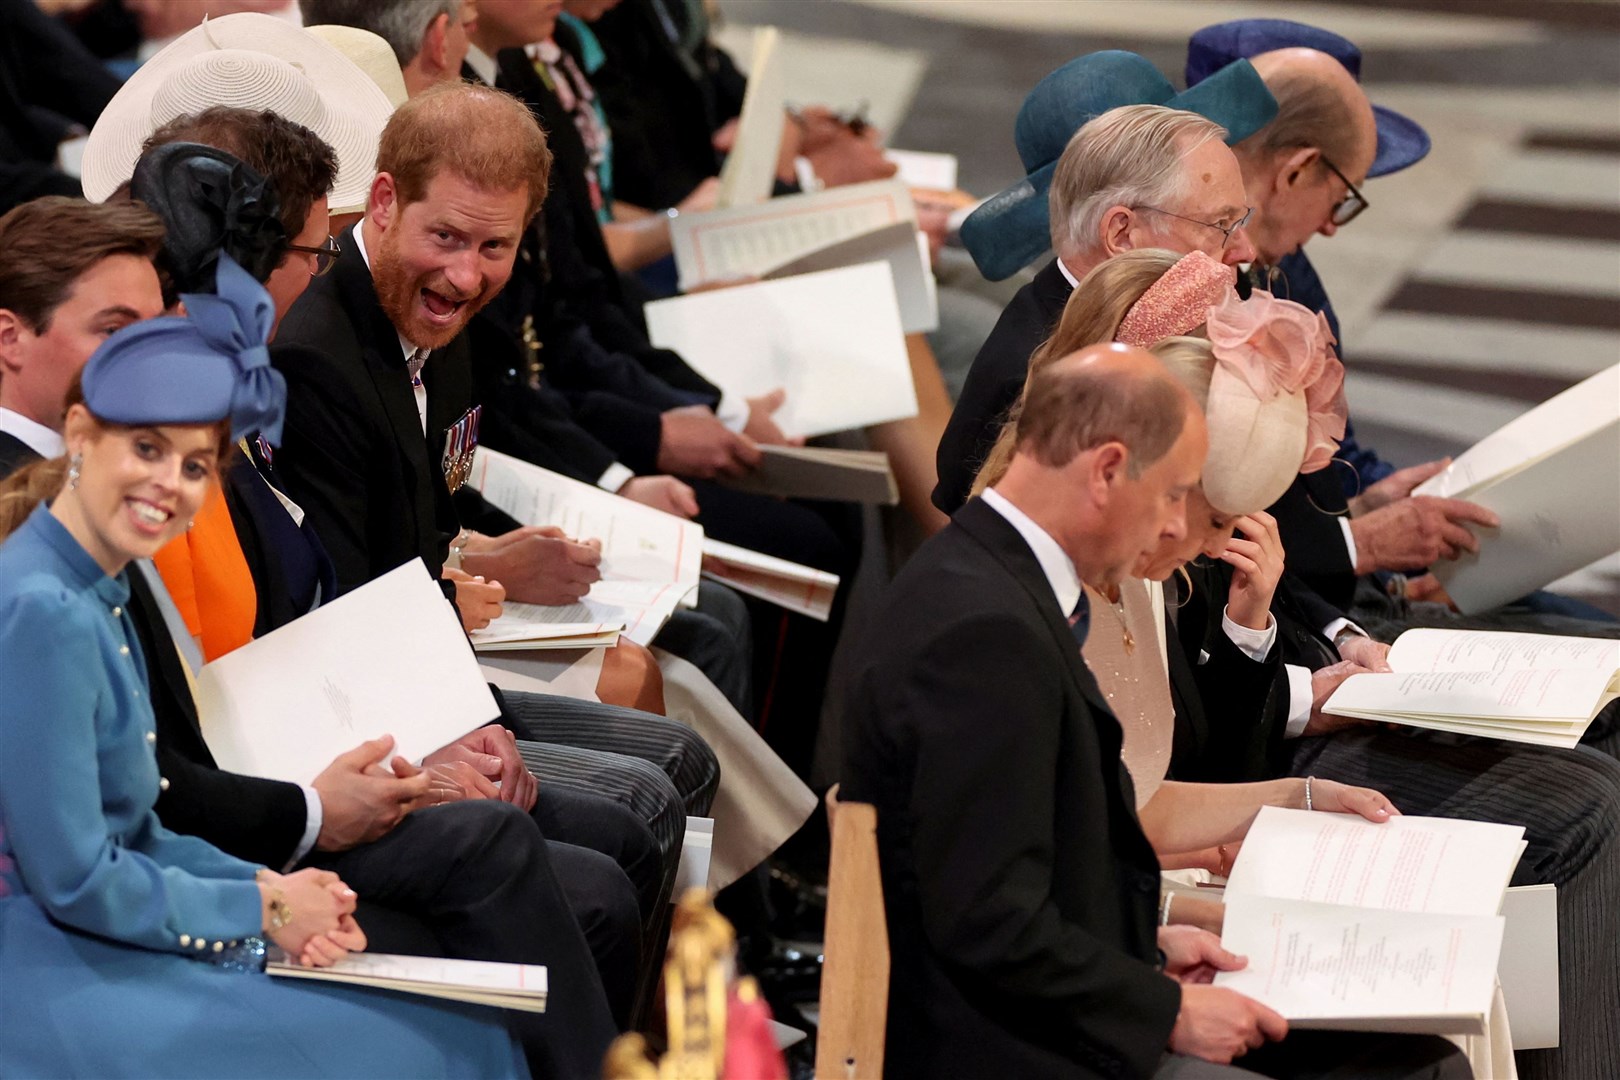 Harry reacts to another guest as does Princess Beatrice (Phil Noble/PA)